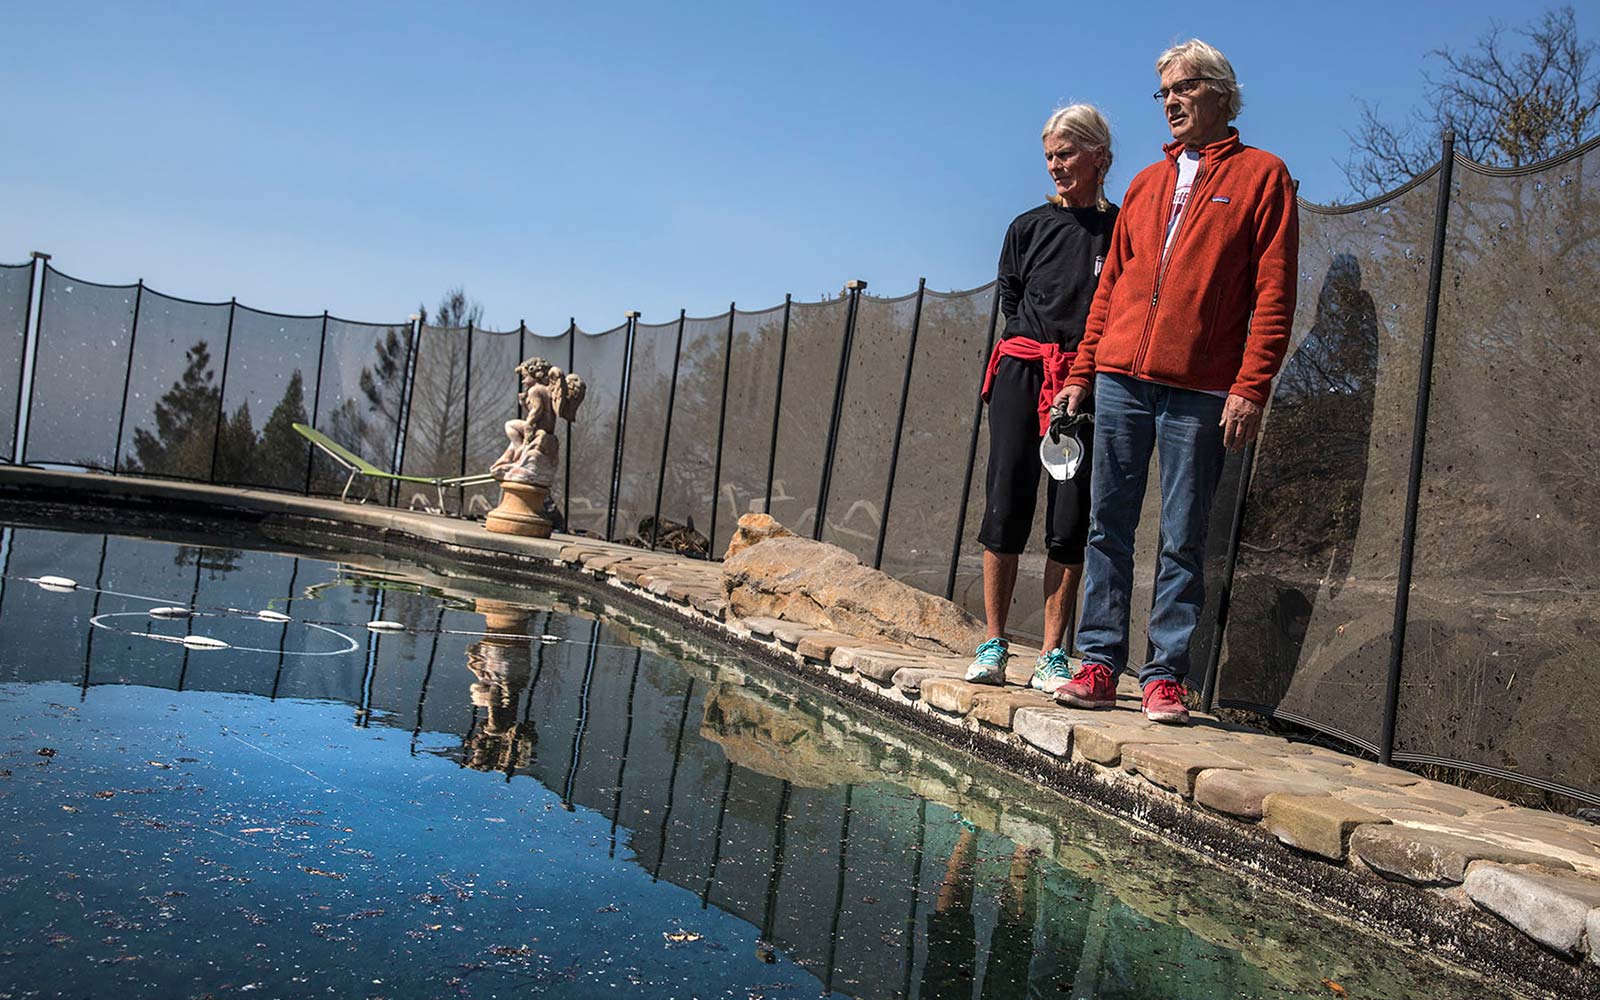 Couple Miraculously Survives California Wildfire in Neighbor's Pool